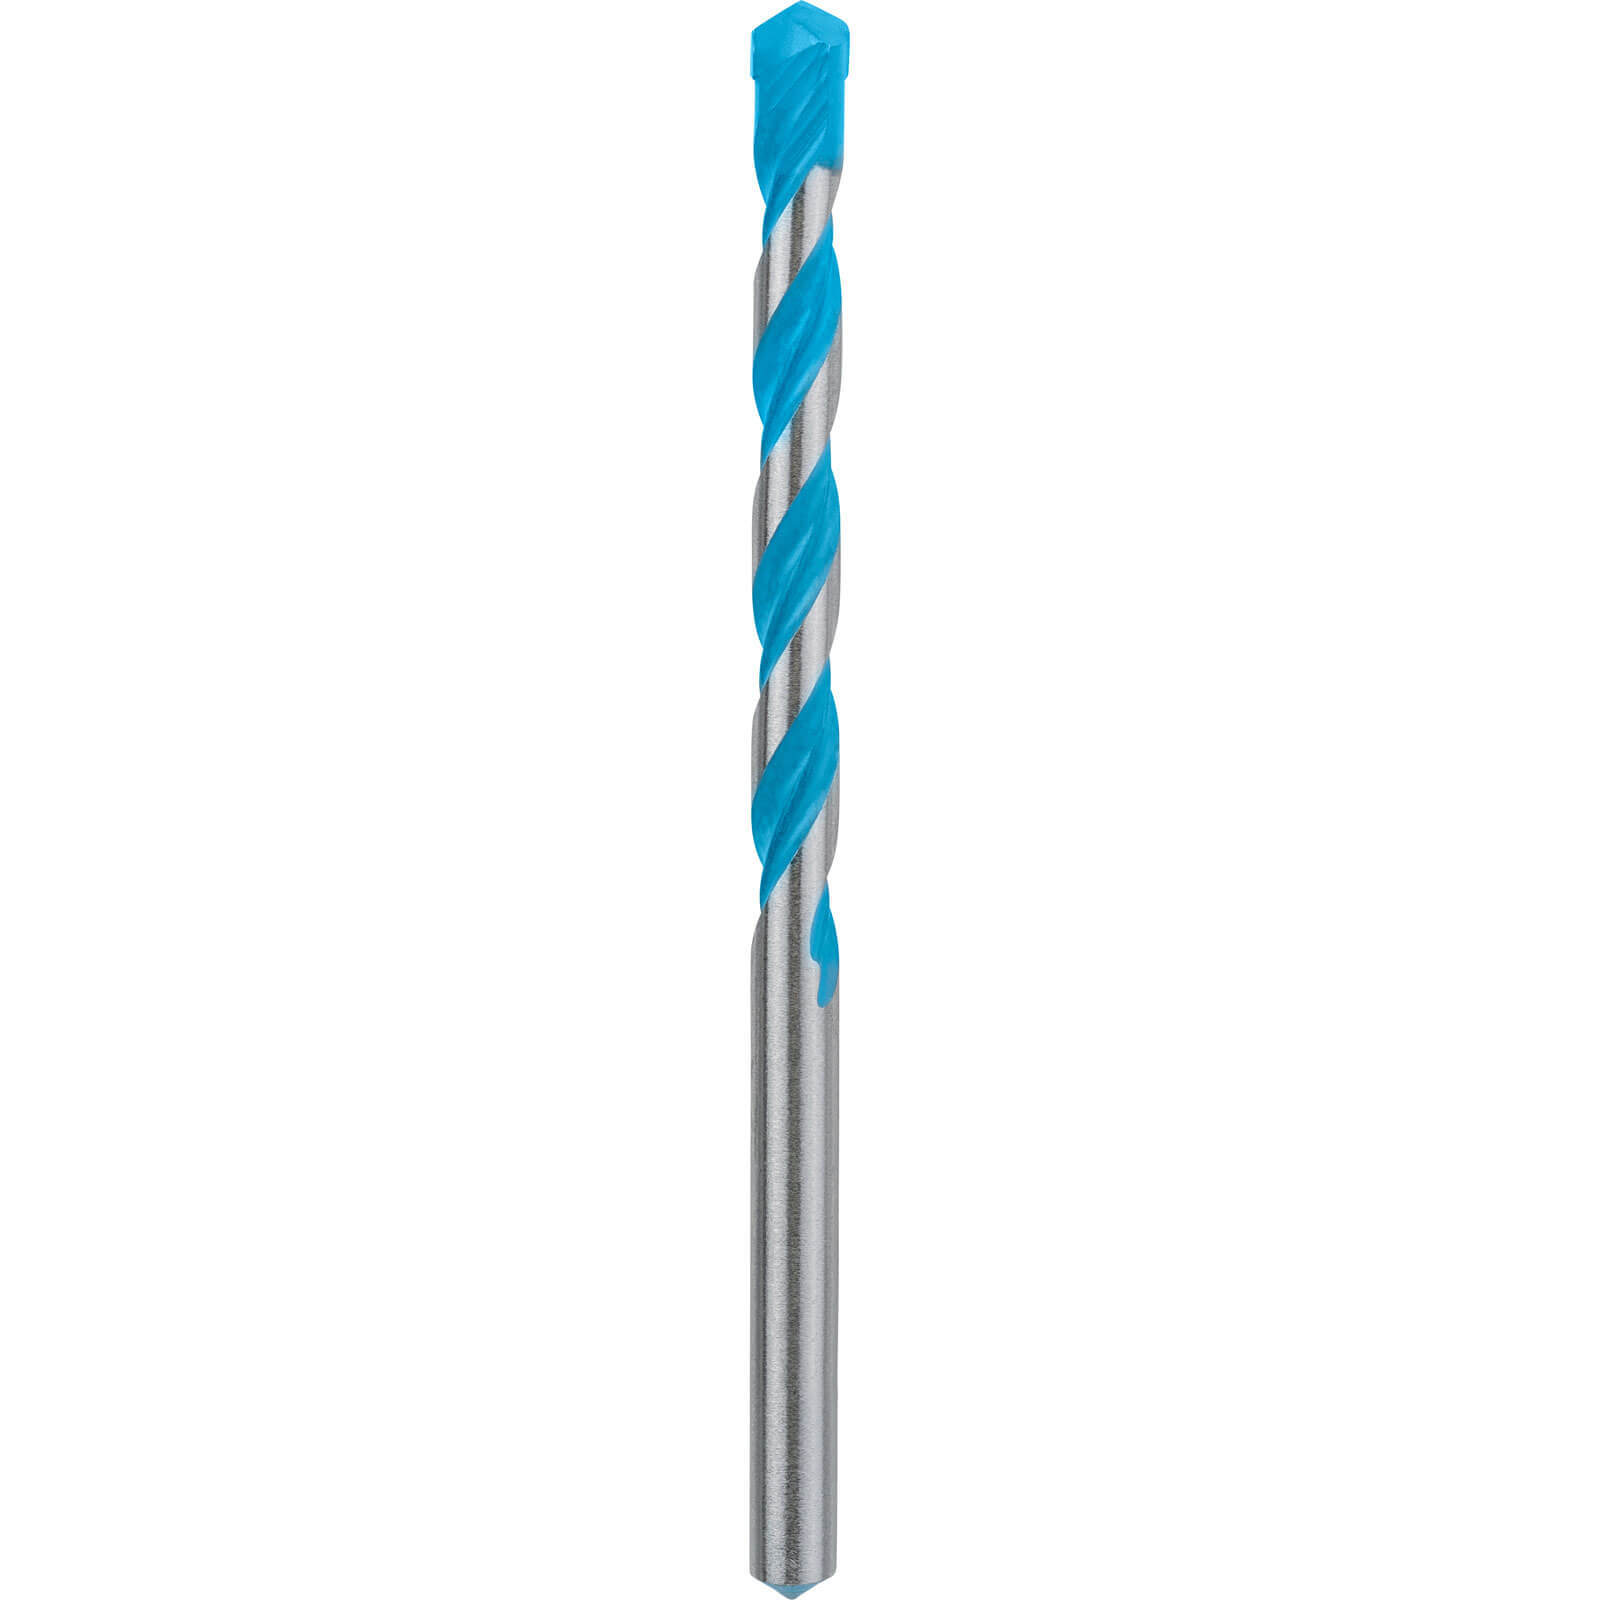 Photo of Bosch Expert Cyl-9 Multi Construction Drill Bit 6mm 100mm Pack Of 10